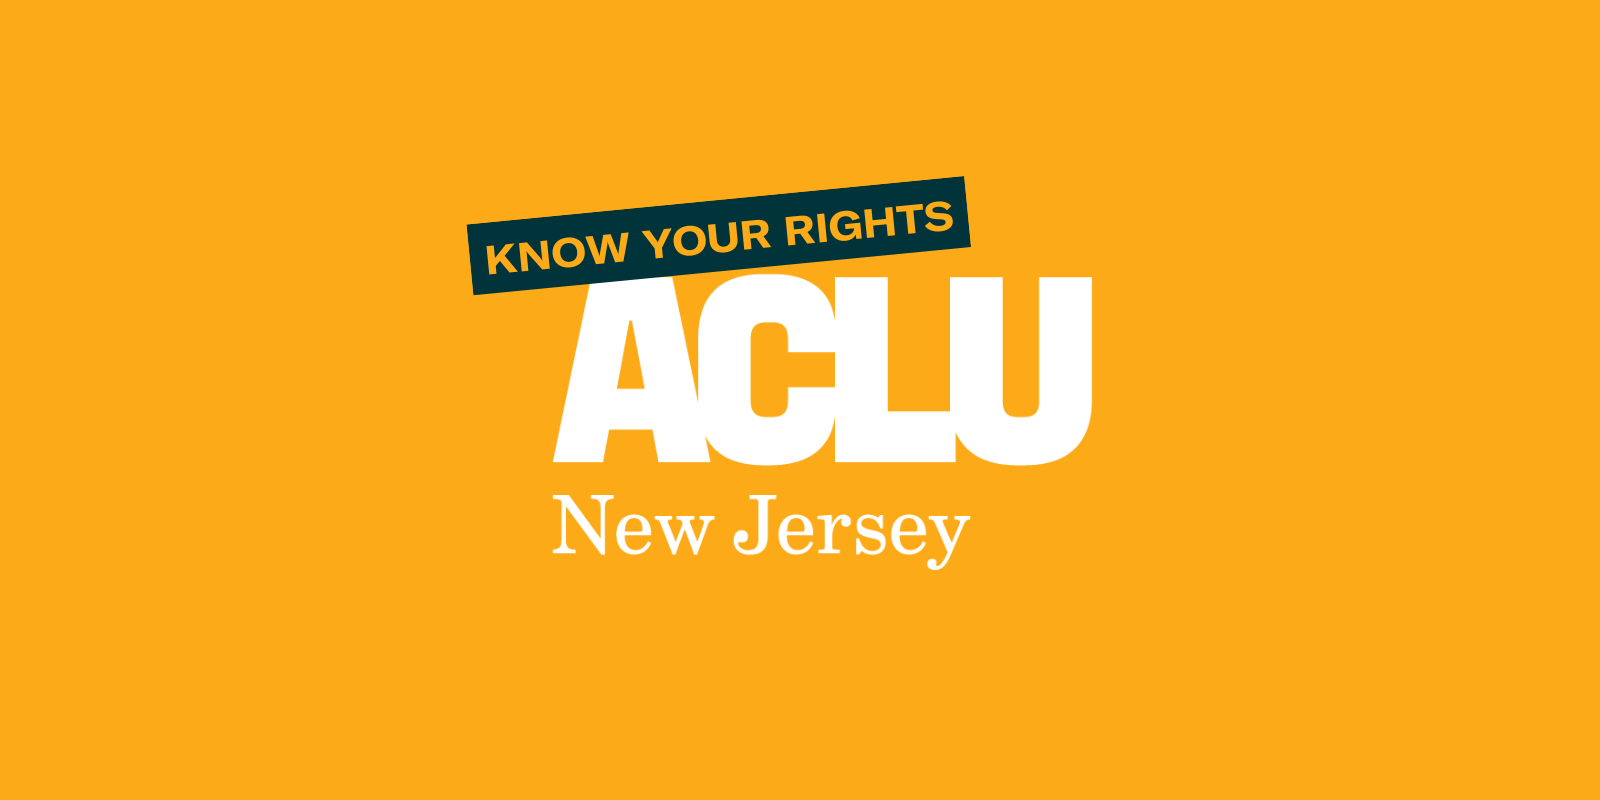 ACLU-NJ logo with a banner at the top reading "Know Your Rights" against an orange background